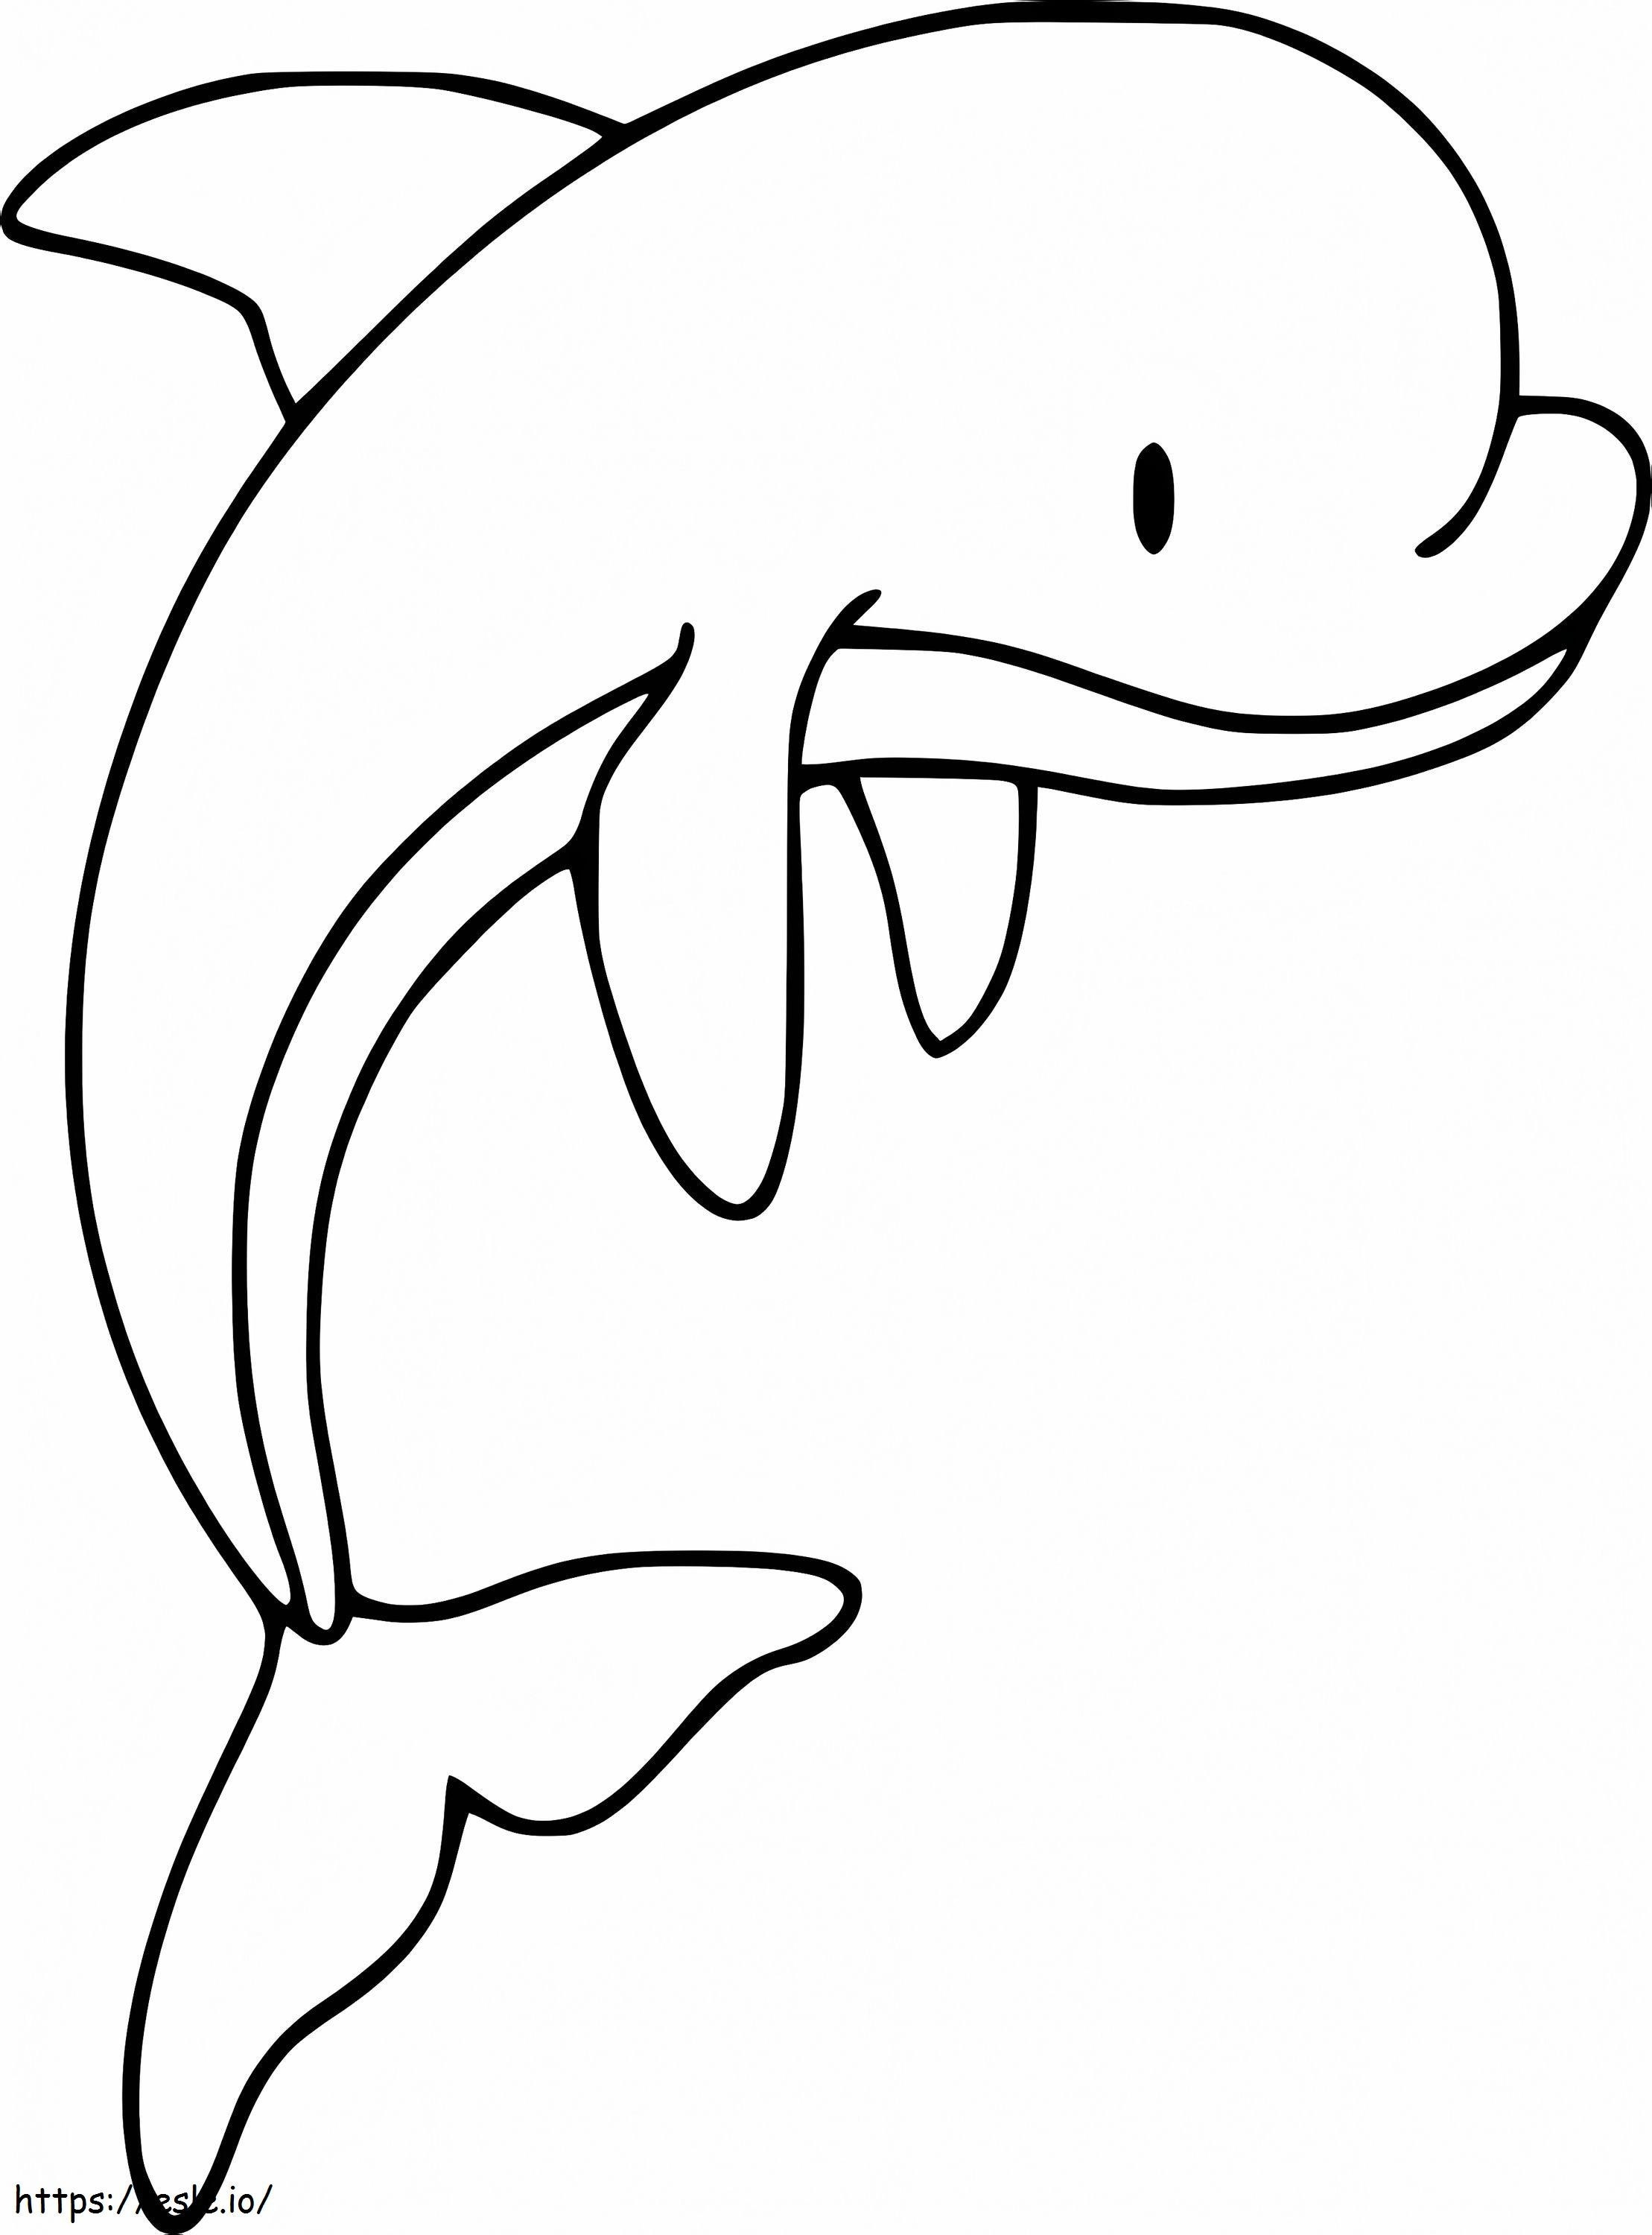 A Dolphin Smiles coloring page